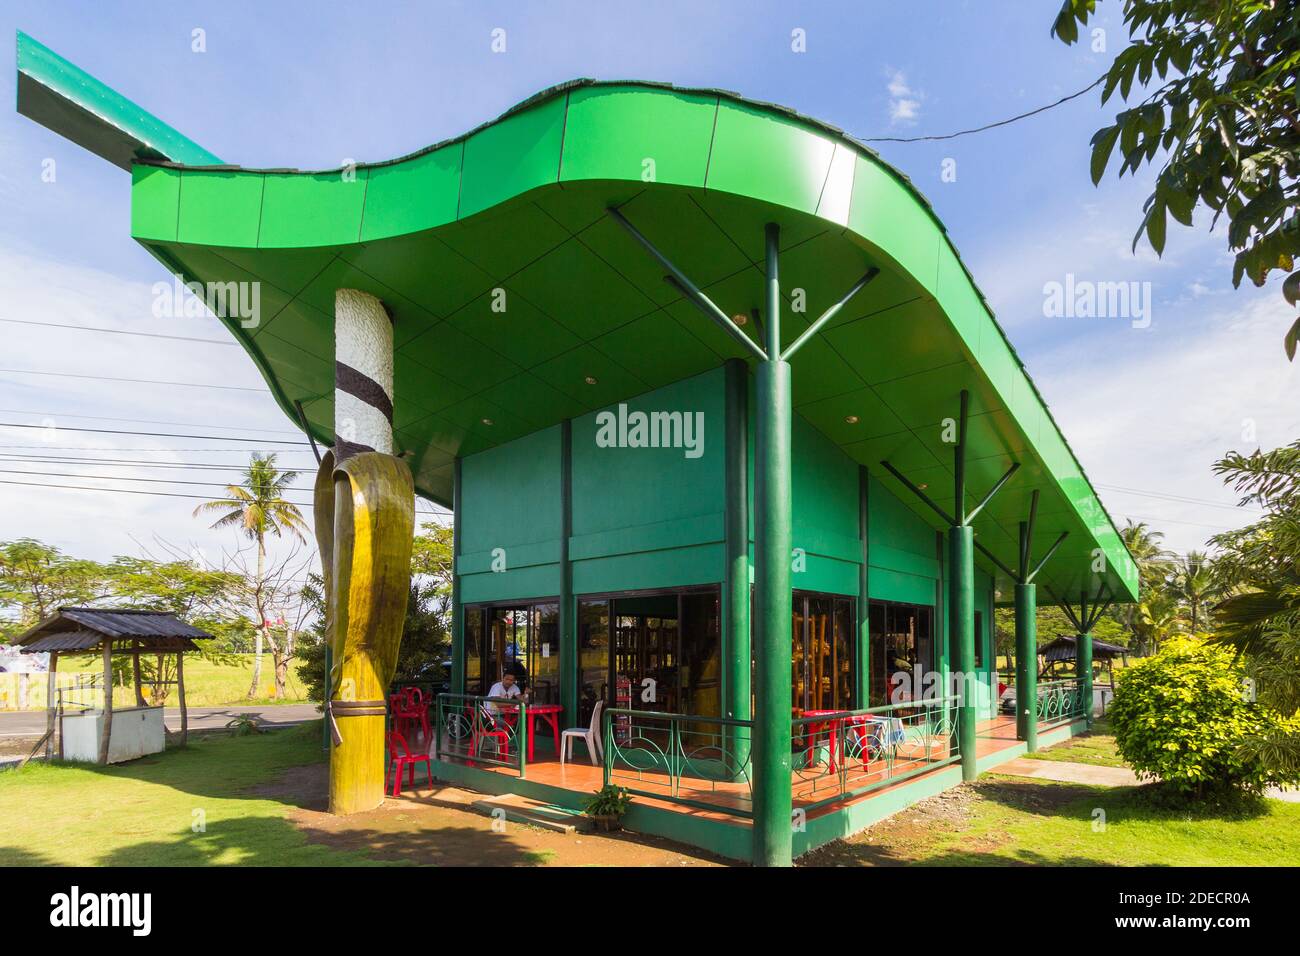 The House of Suman in Clarin, Misamis Occidental, Philippines Stock Photo